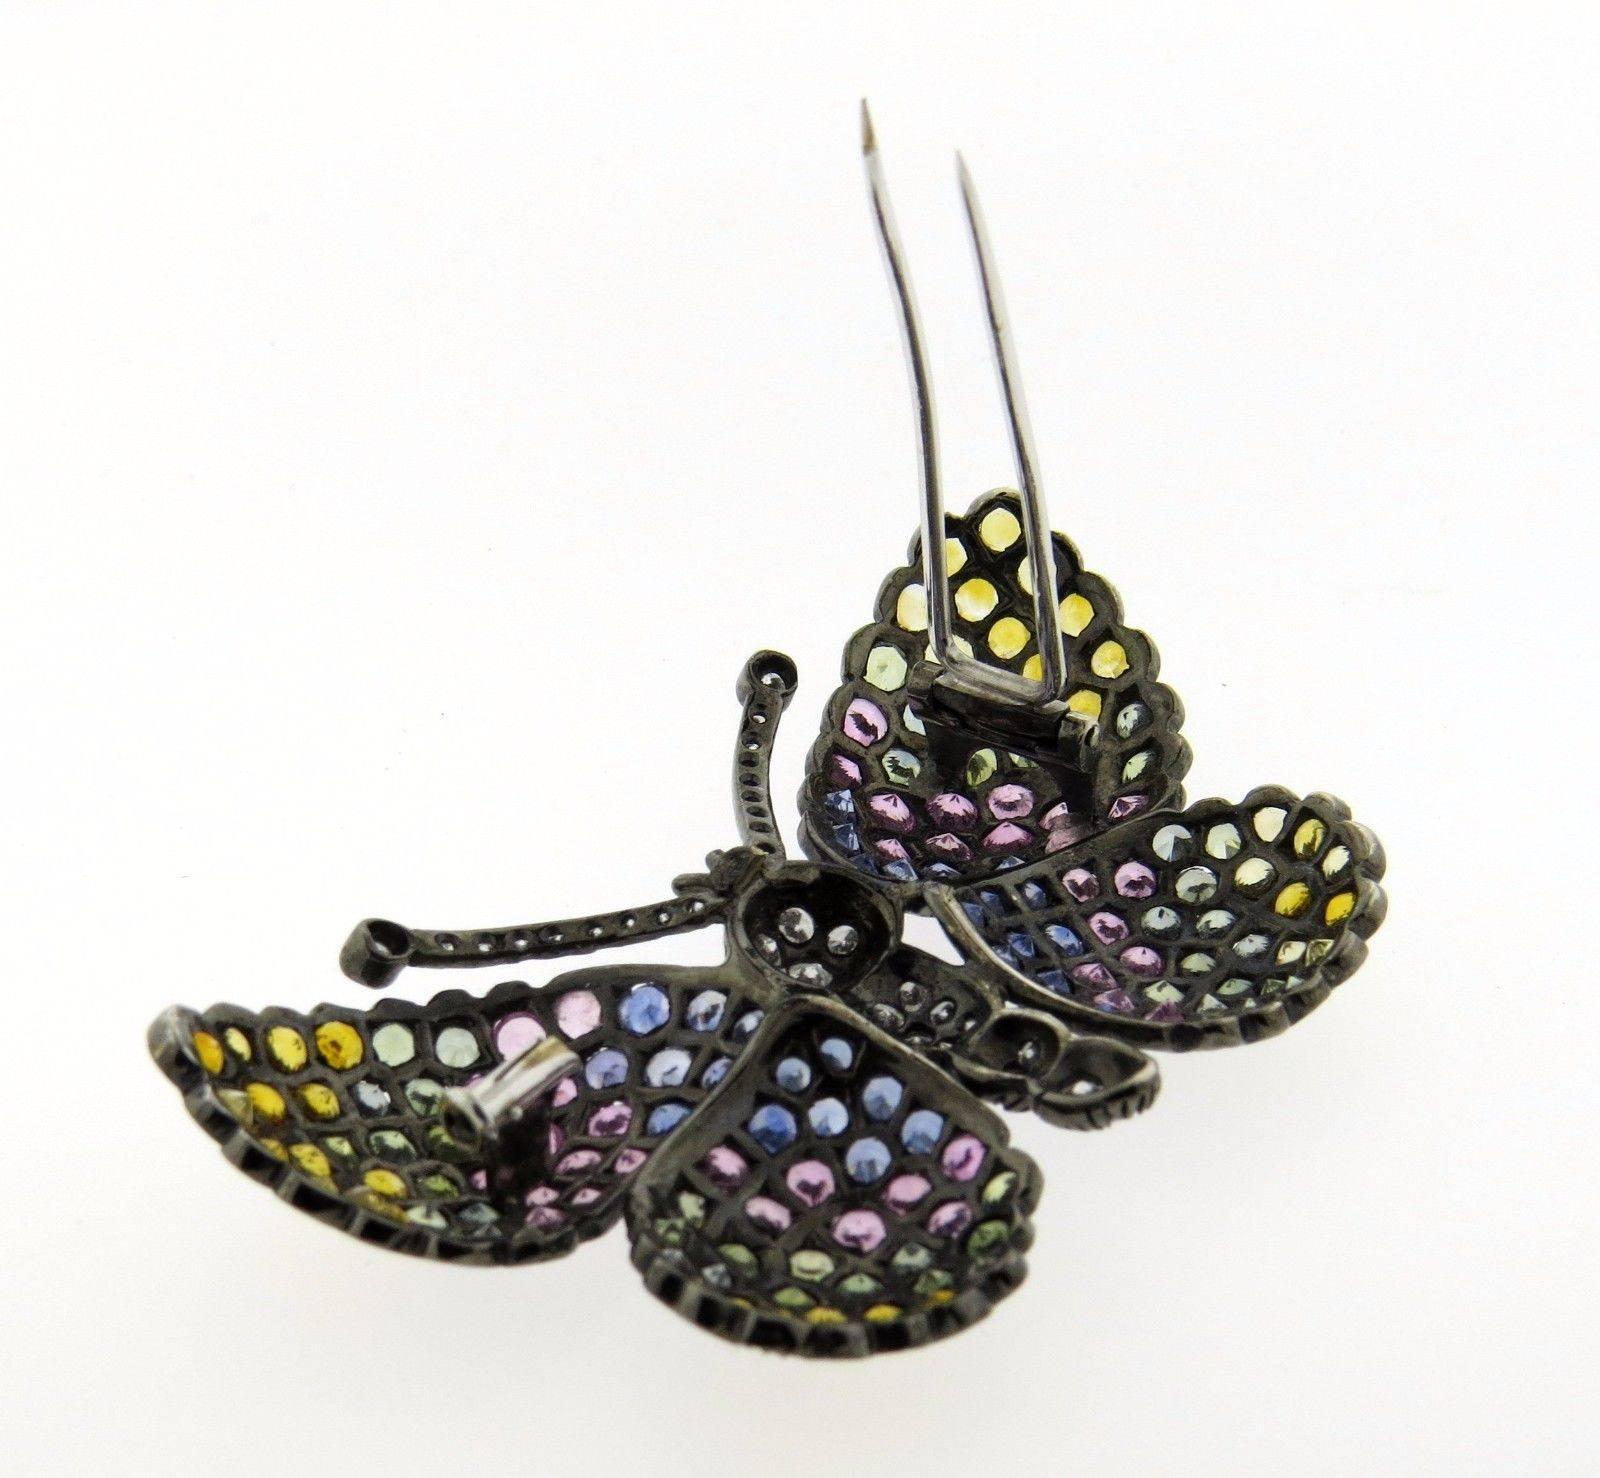 An 18k gold butterfly brooch set with approximately 1.10ctw of G-H/VS1-SI1 diamonds and multi color sapphires. The brooch measures 65mm x 41mm and weighs 24.8 grams.